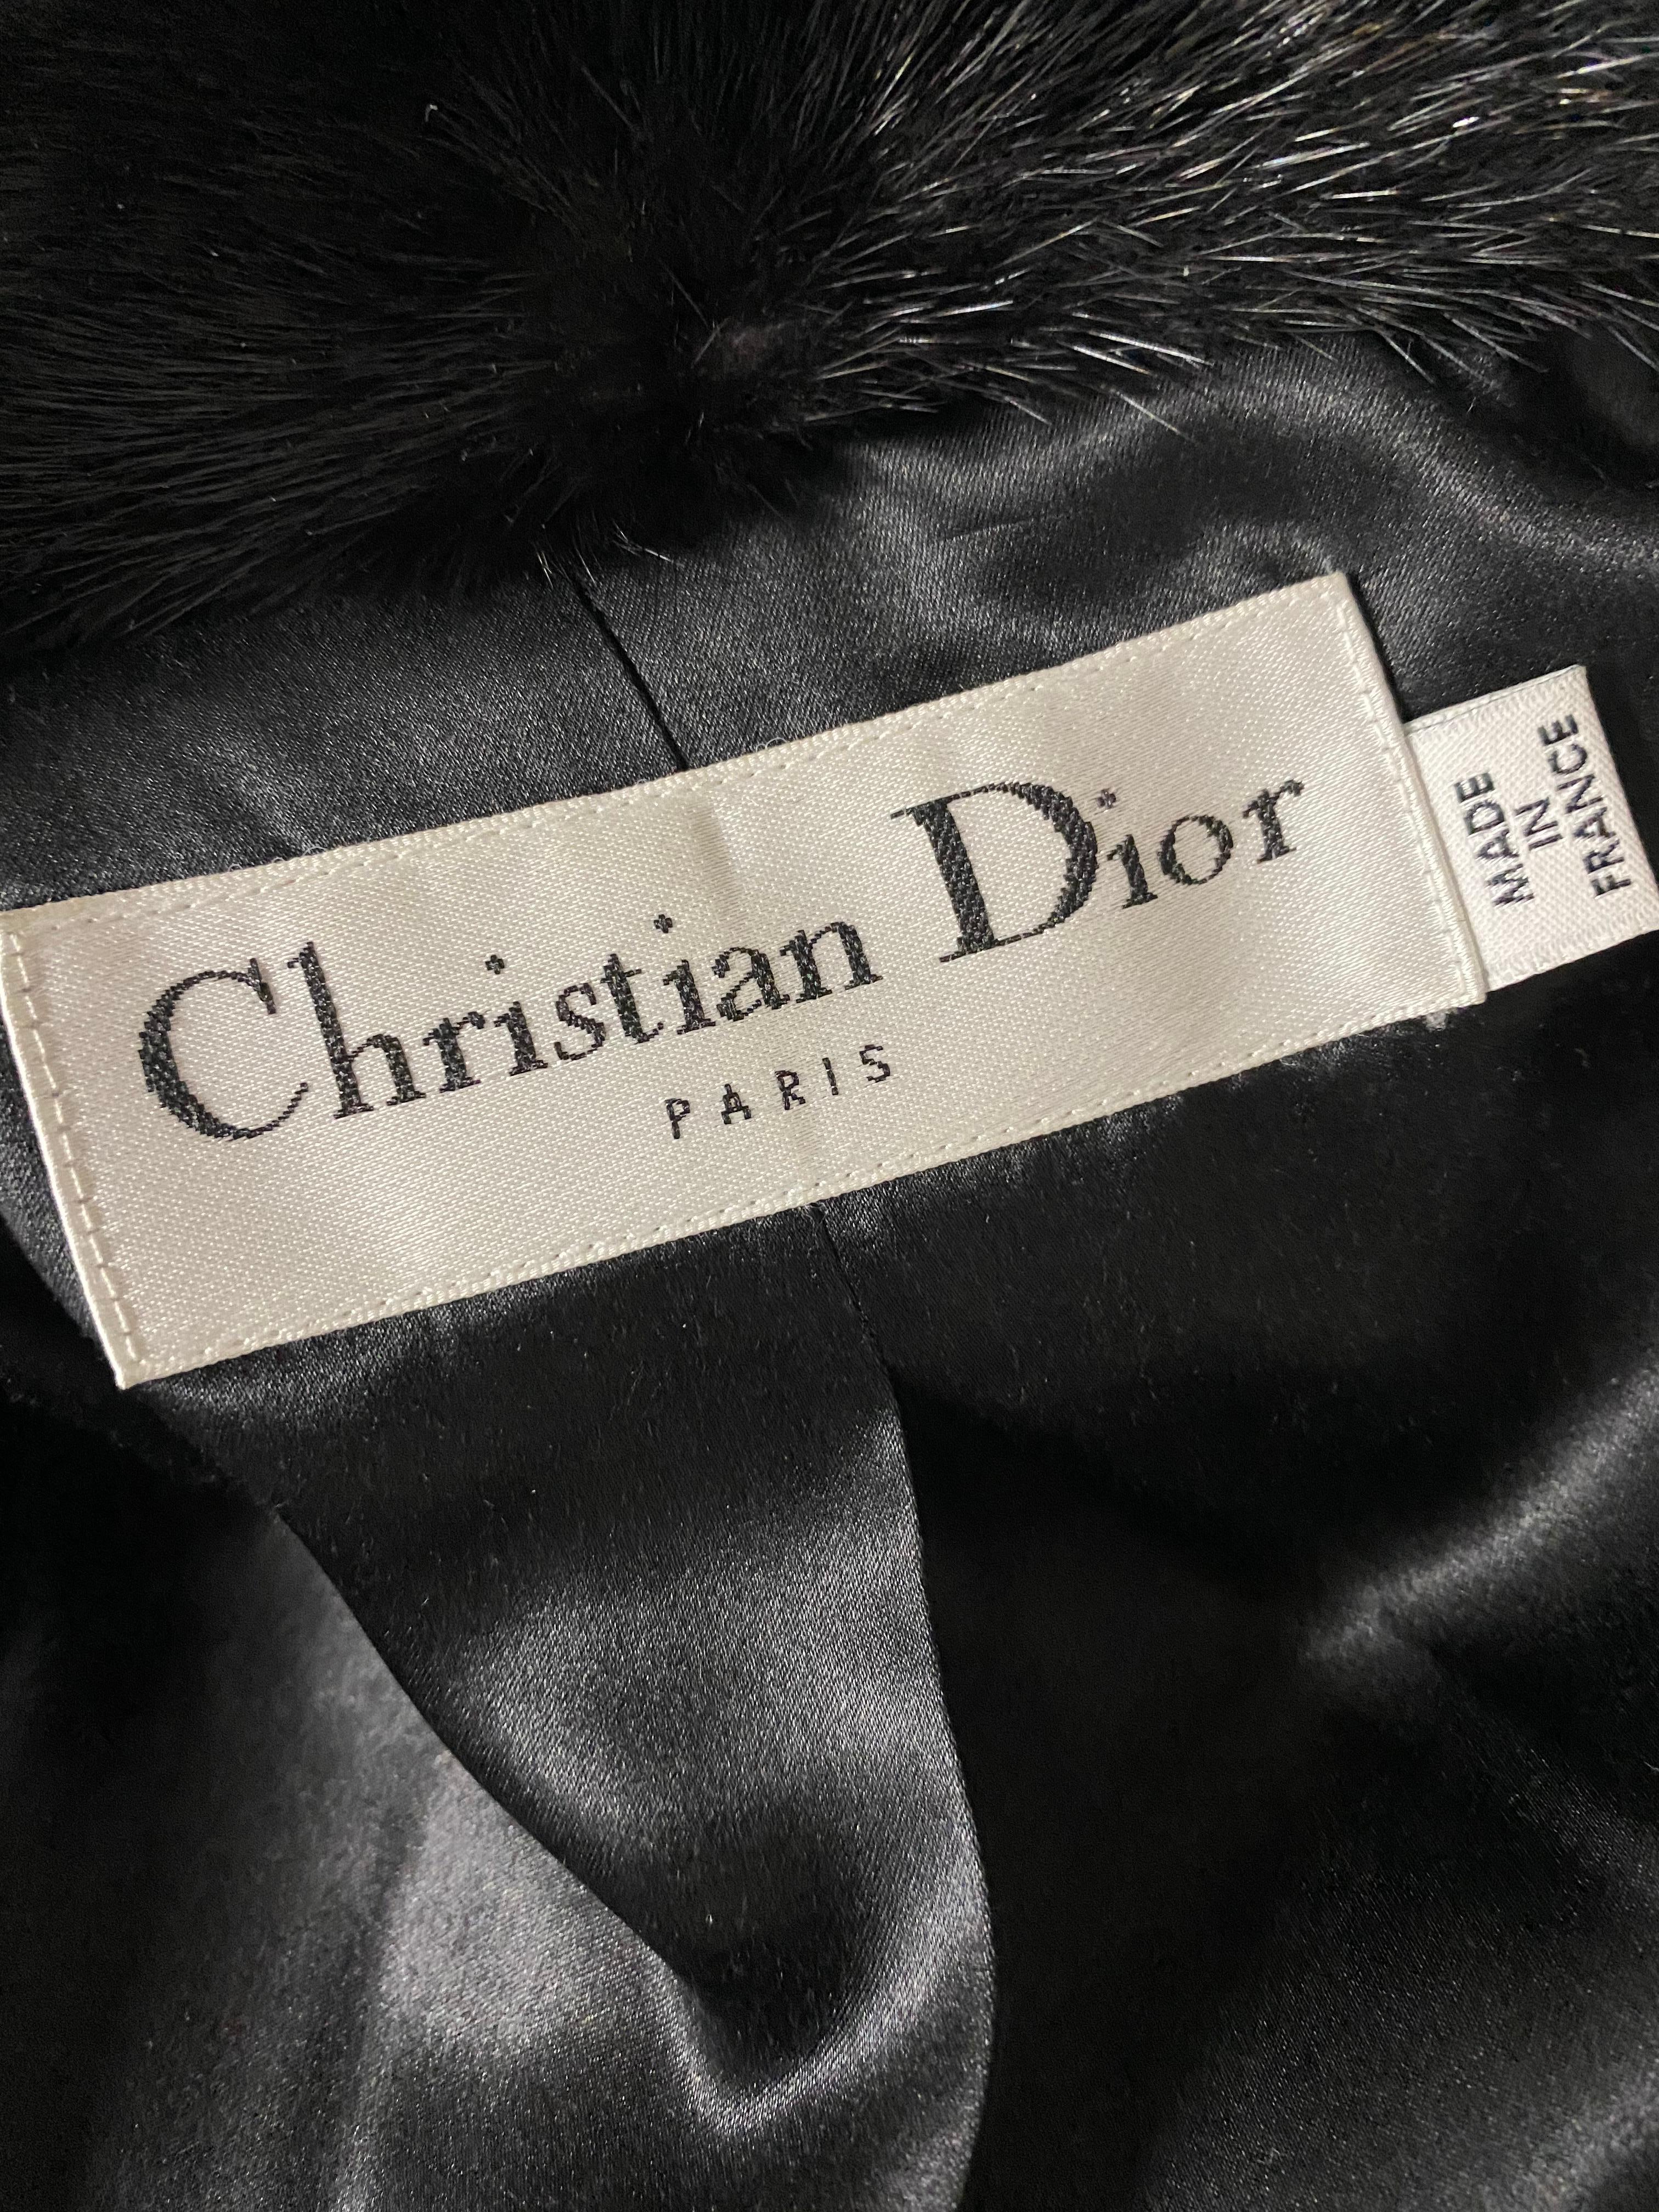 Christian Dior Black Wool Tweed and Fur Coat Jacket Size 40 For Sale 5